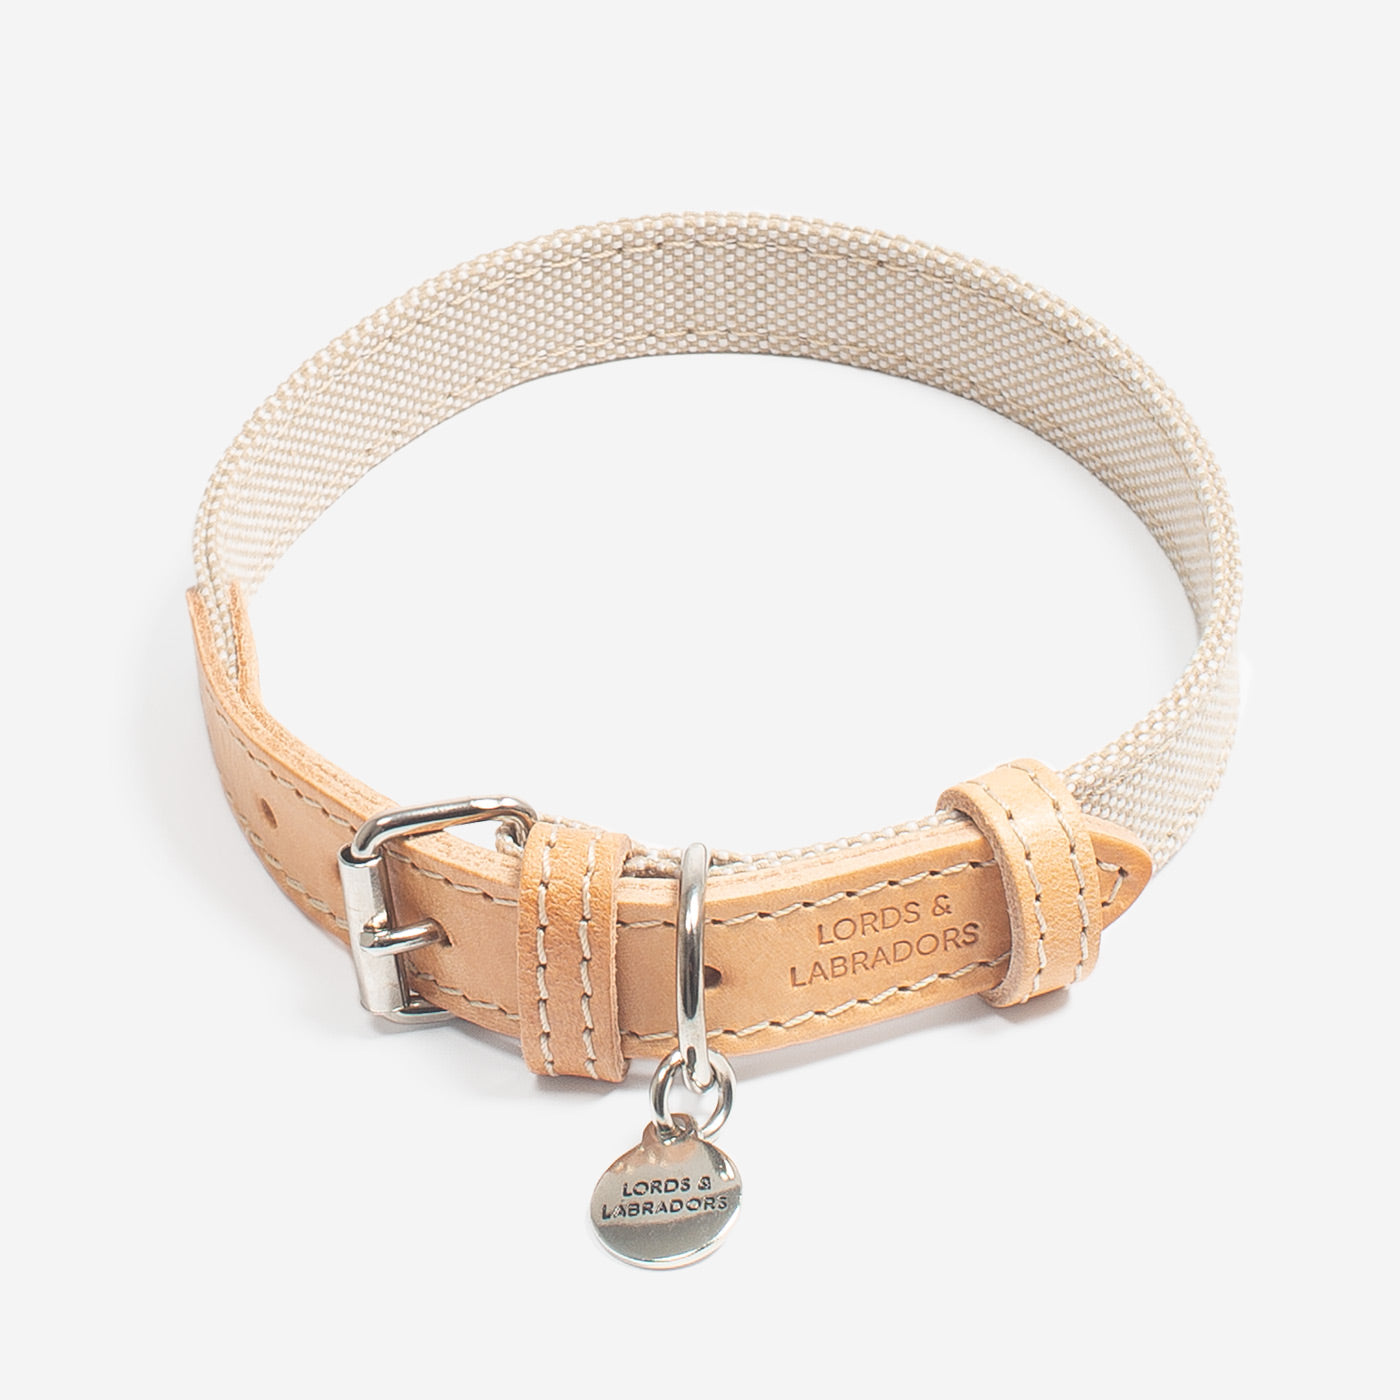 Discover dog walking luxury with our handcrafted Italian dog collar in beautiful essentials twill cream linen with cream fabric! The perfect collar for dogs available now at Lords & Labradors 